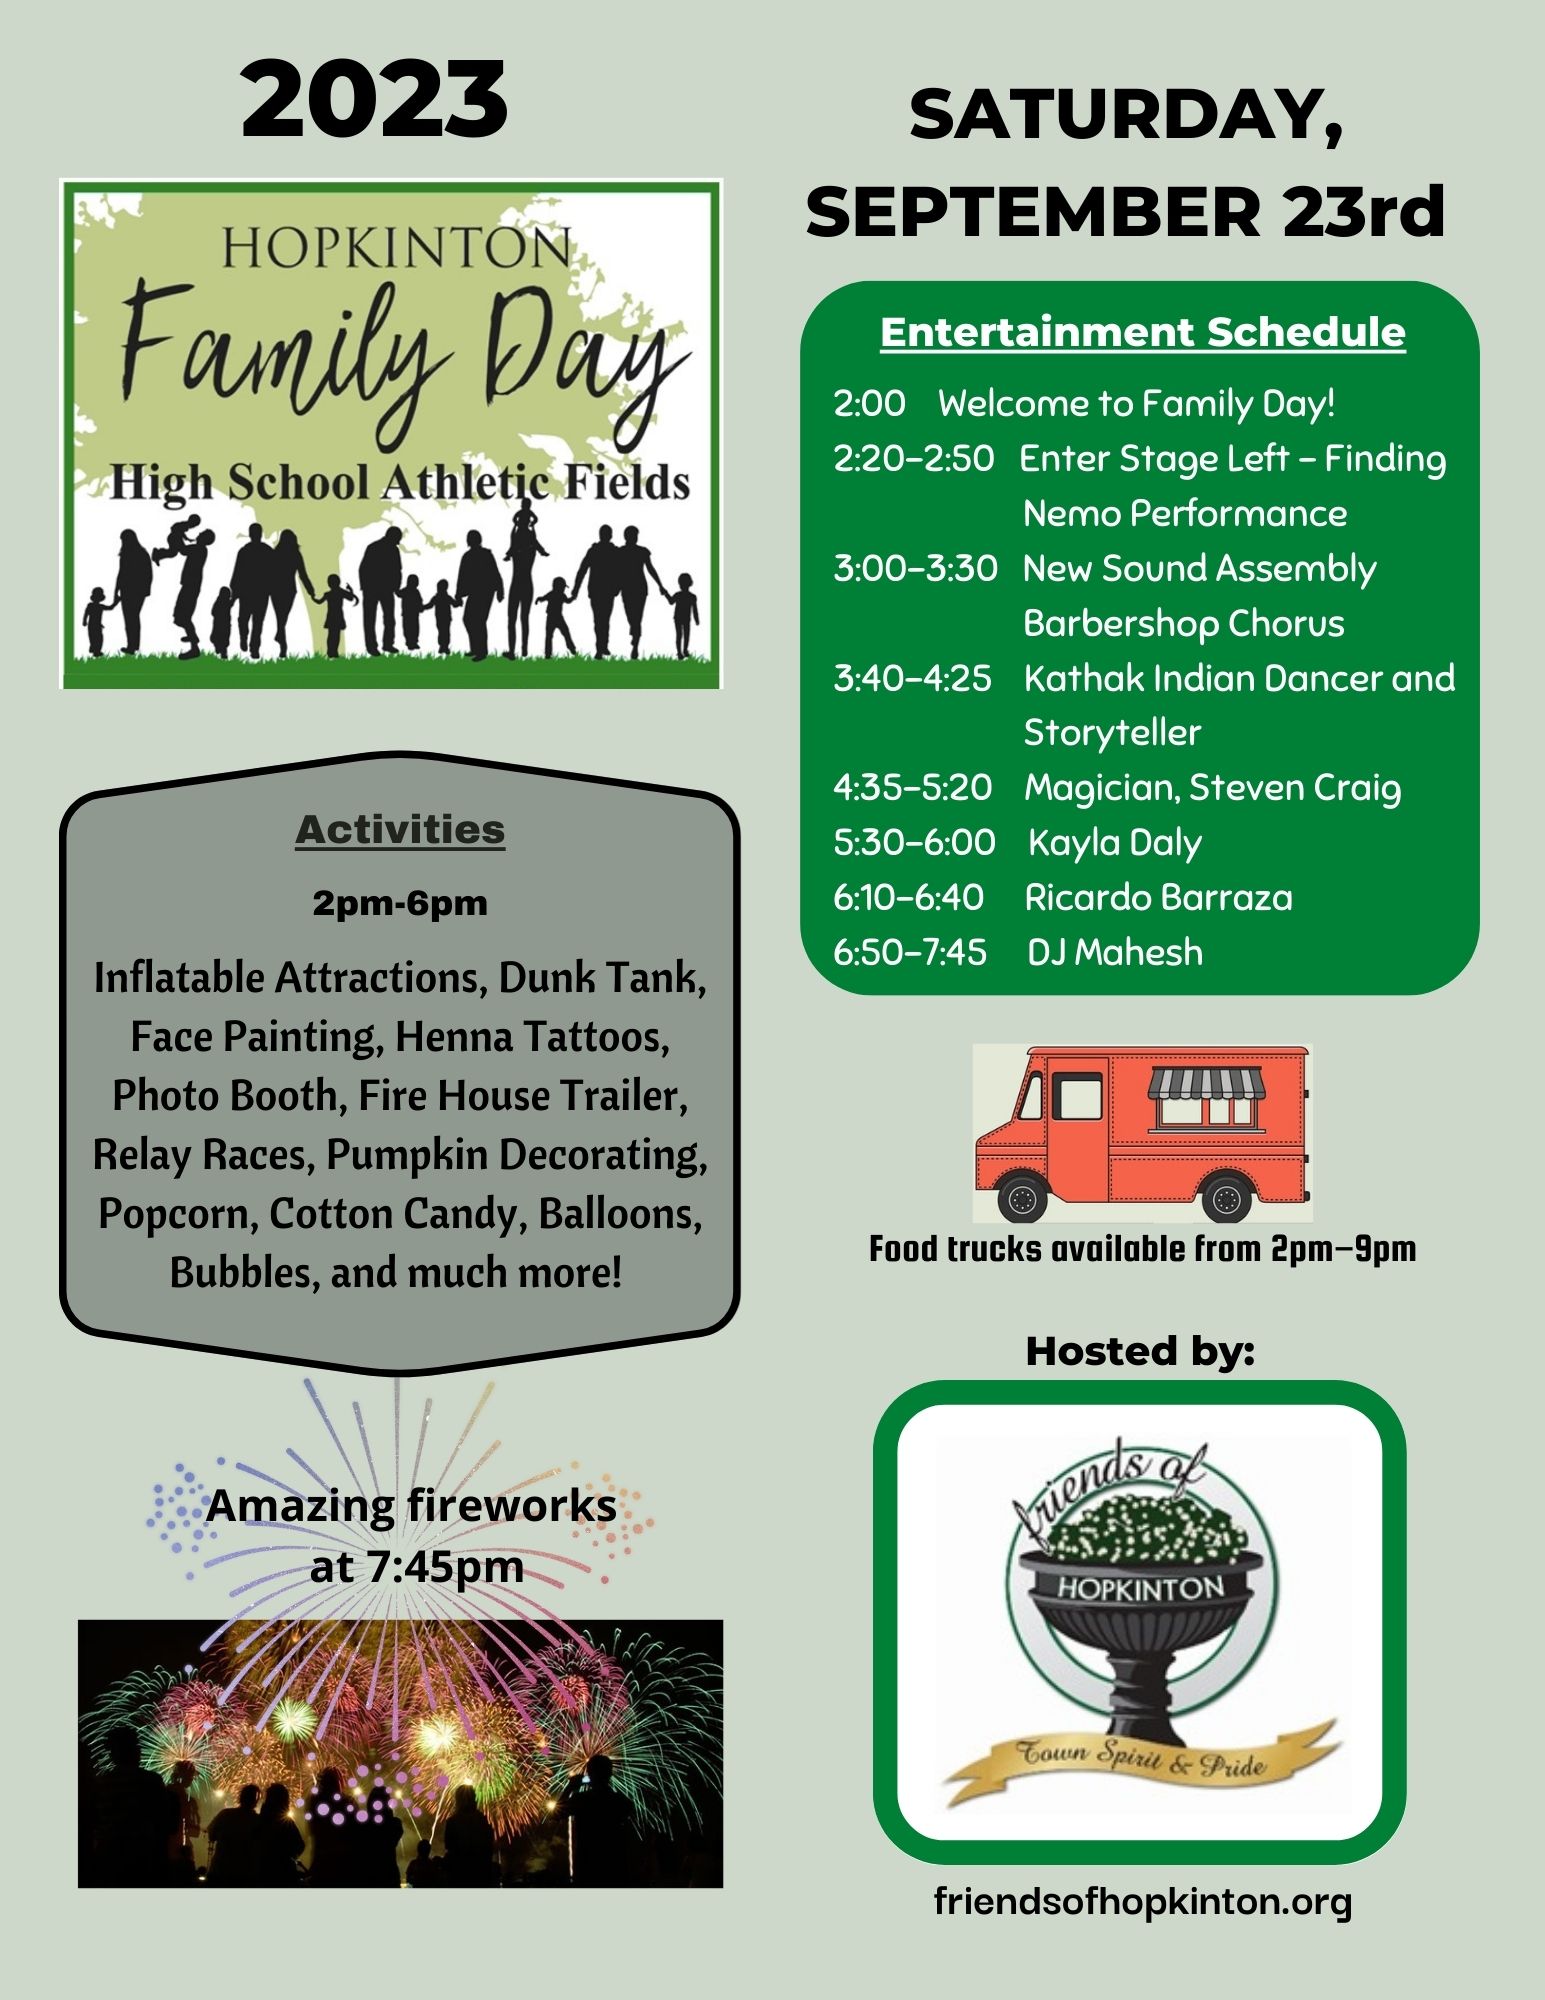 Family Day organizers announce entertainment schedule for Saturday’s event